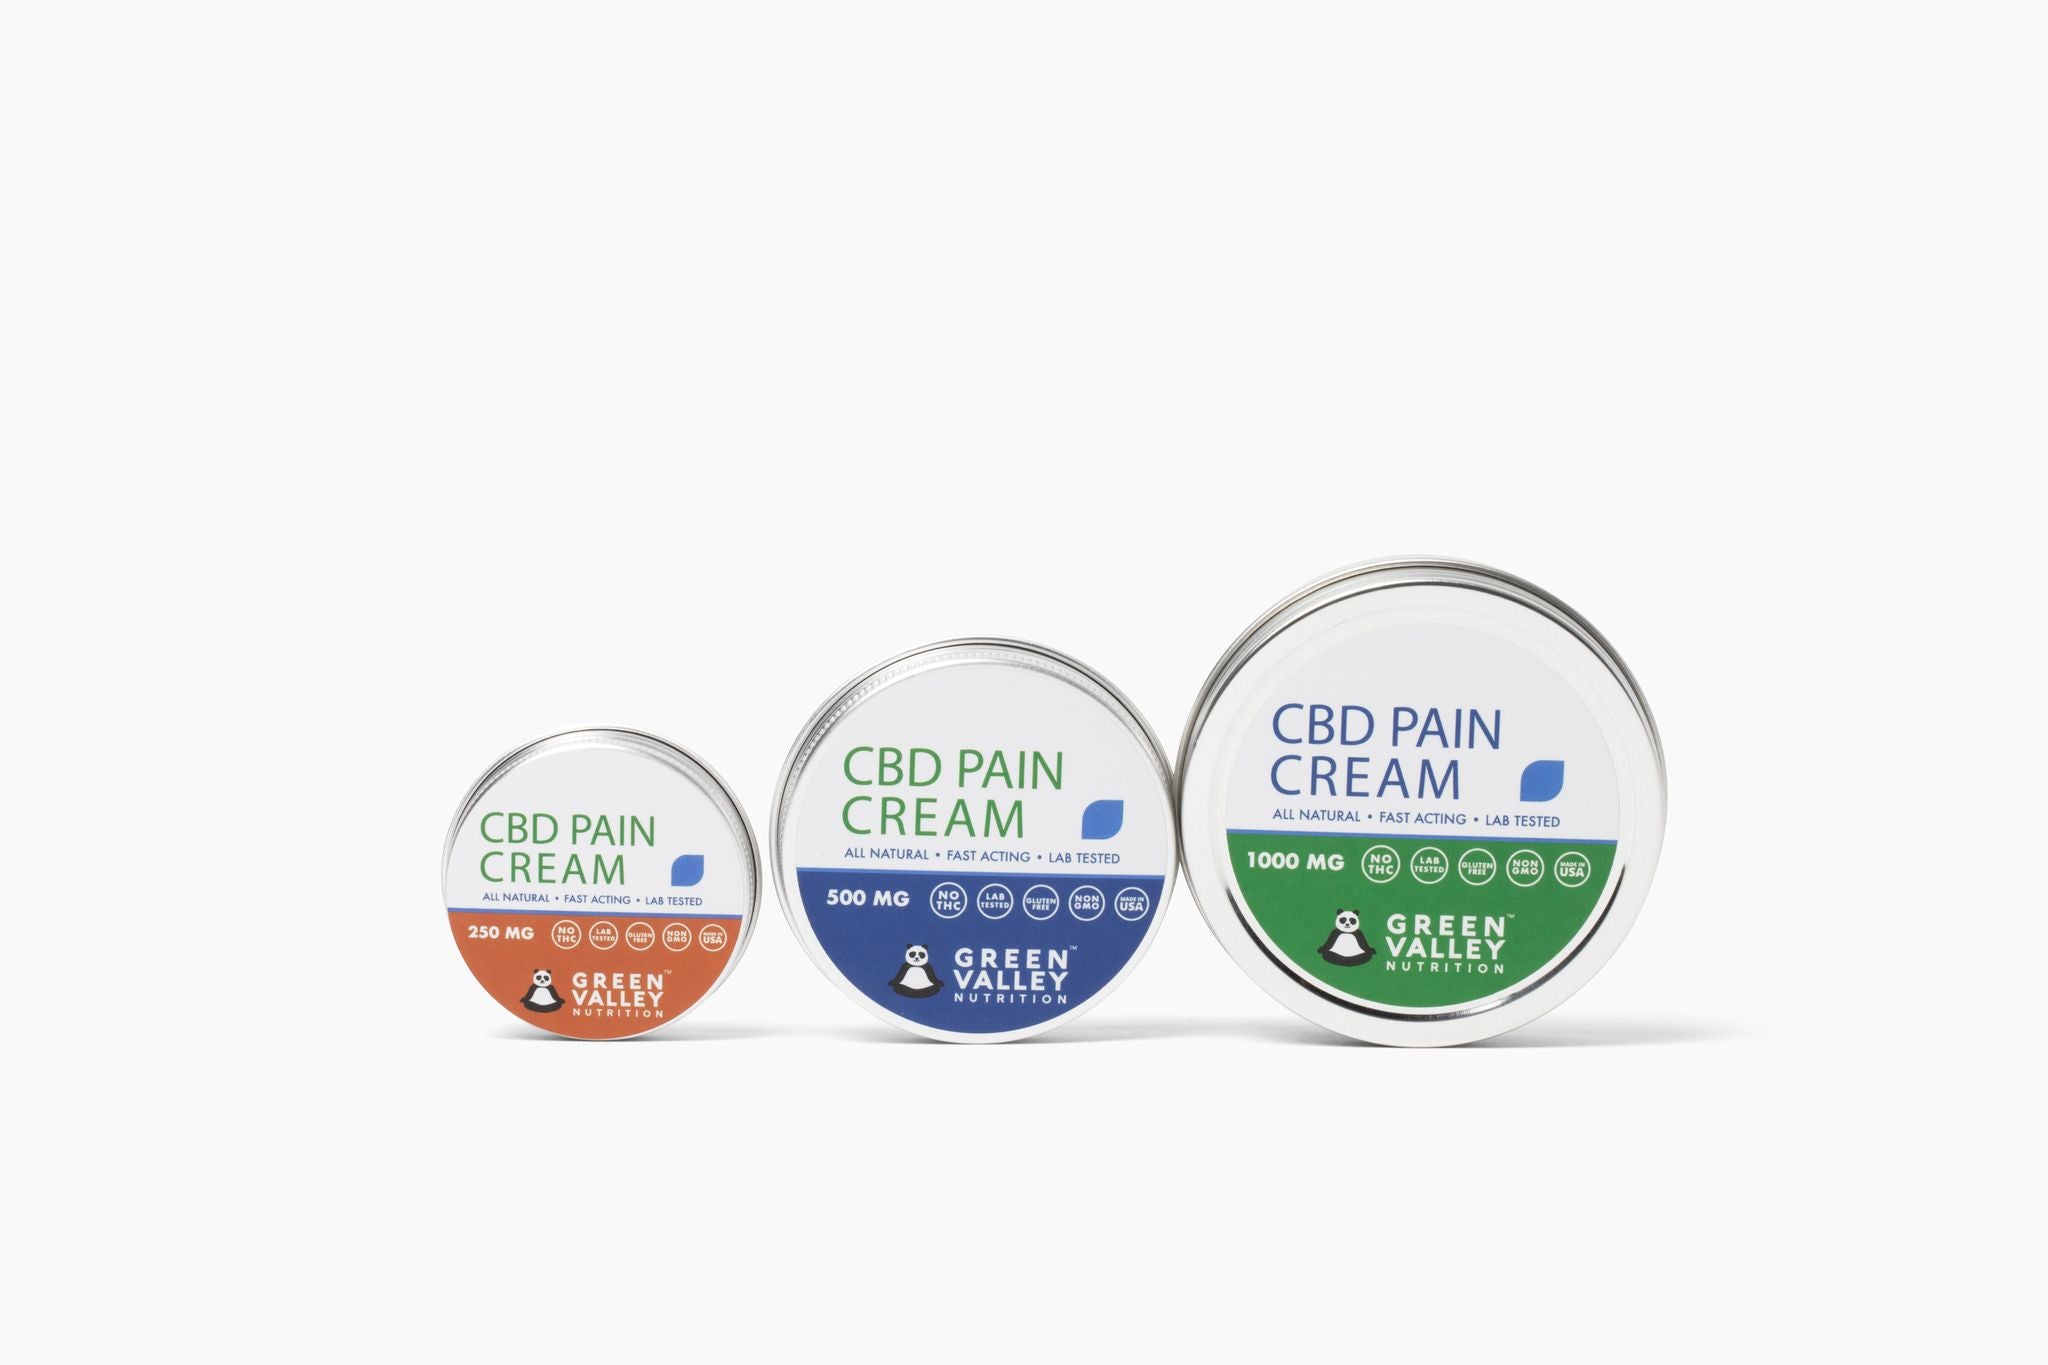 500mg CBD Pain Cream - Feel Better Fast™ with Green Valley 